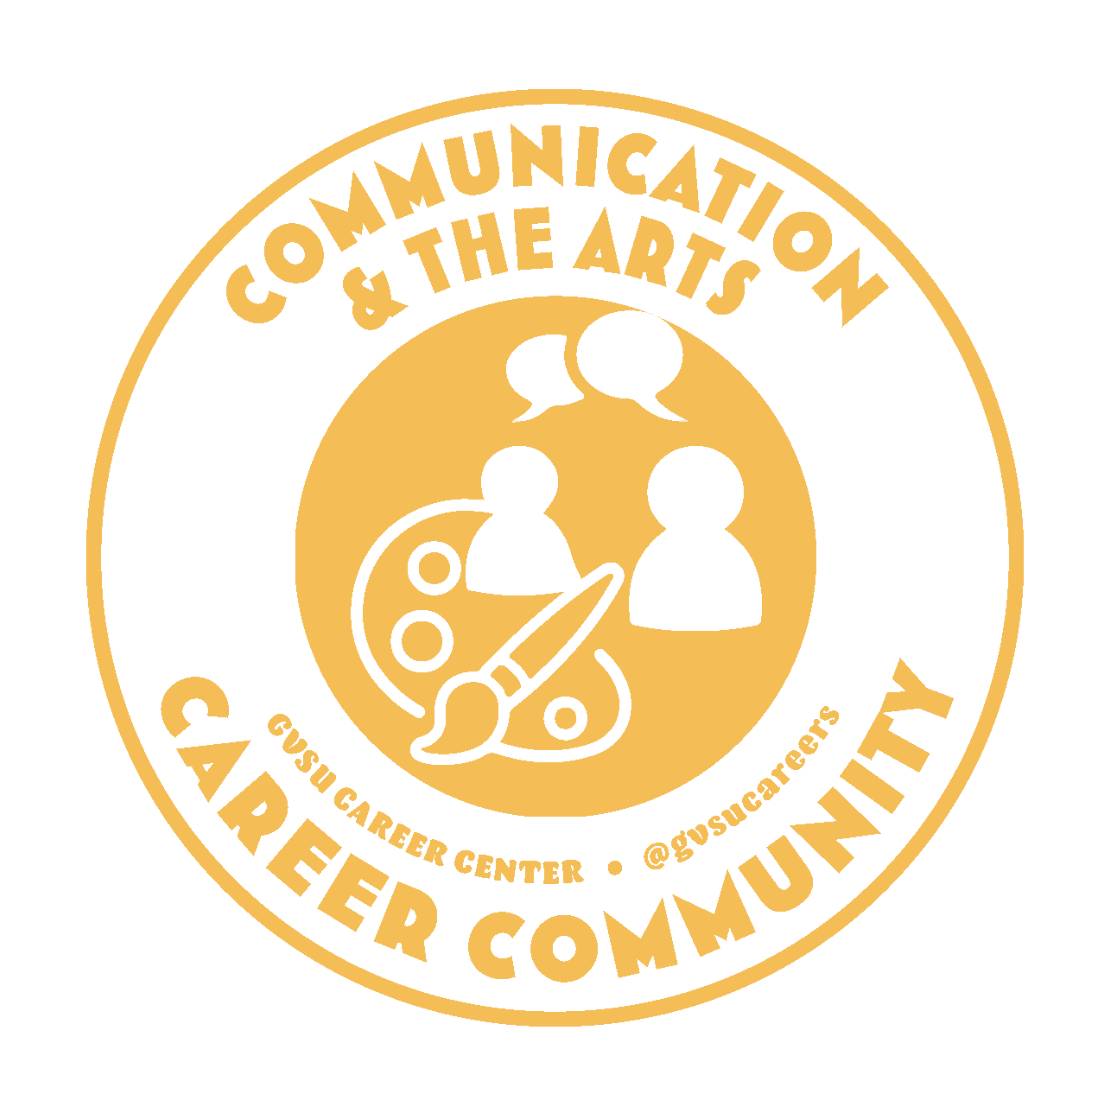 Comm. and the arts cc logo